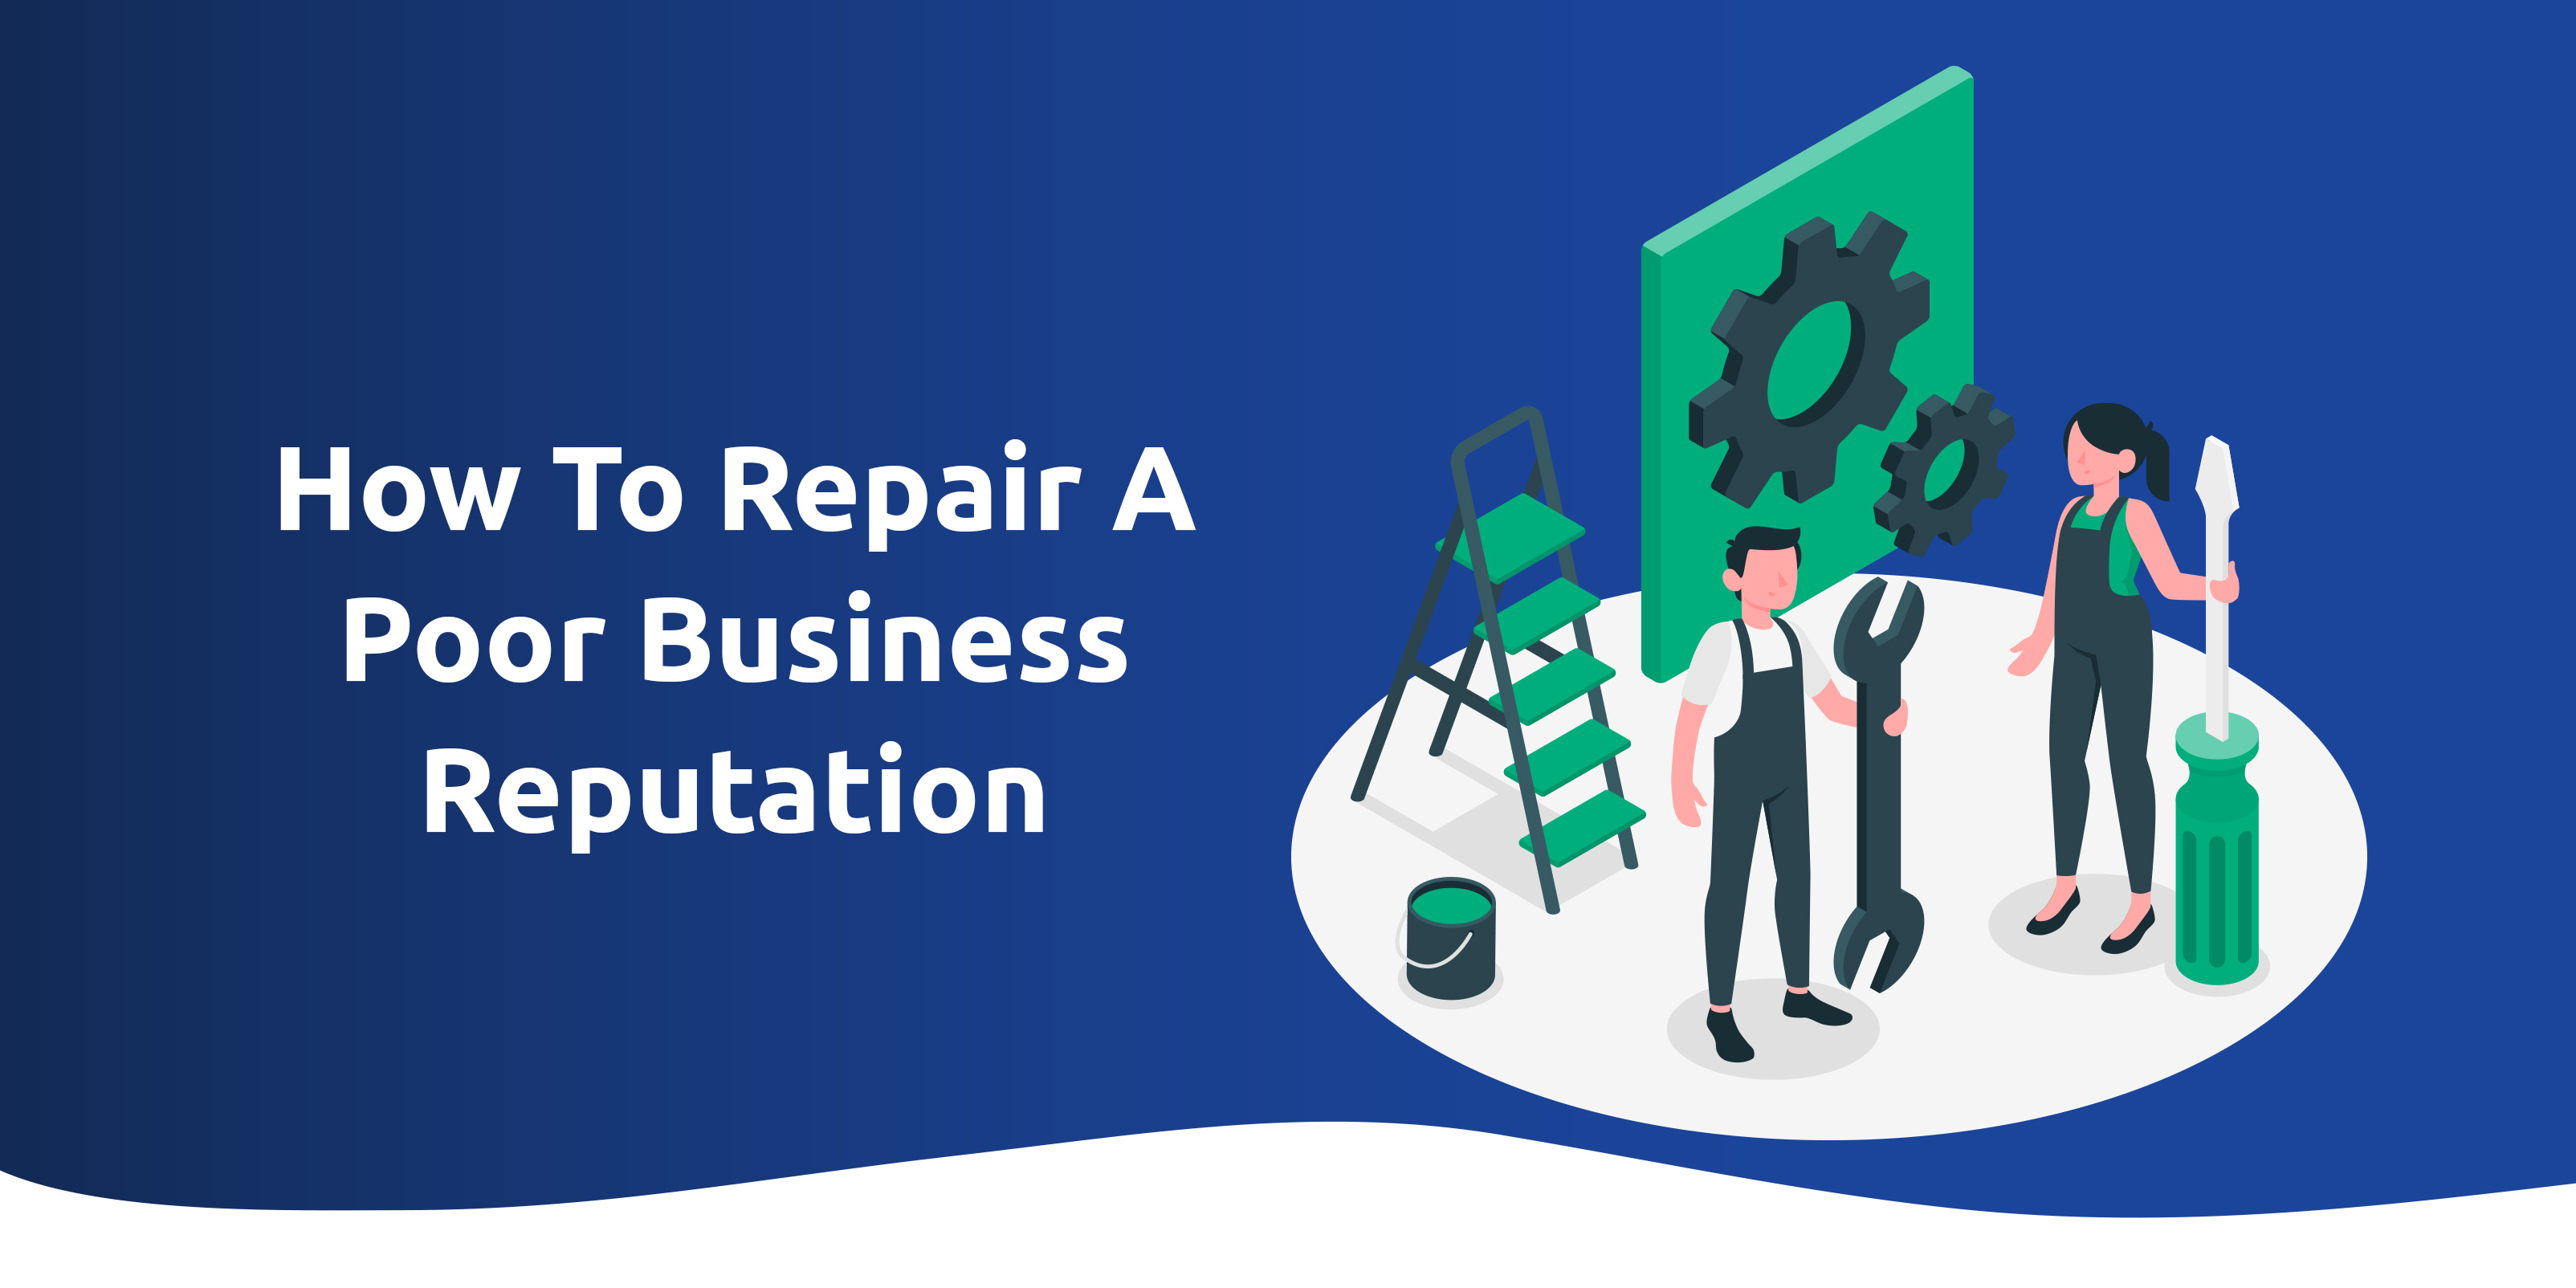 How to Repair a Poor Business Reputation